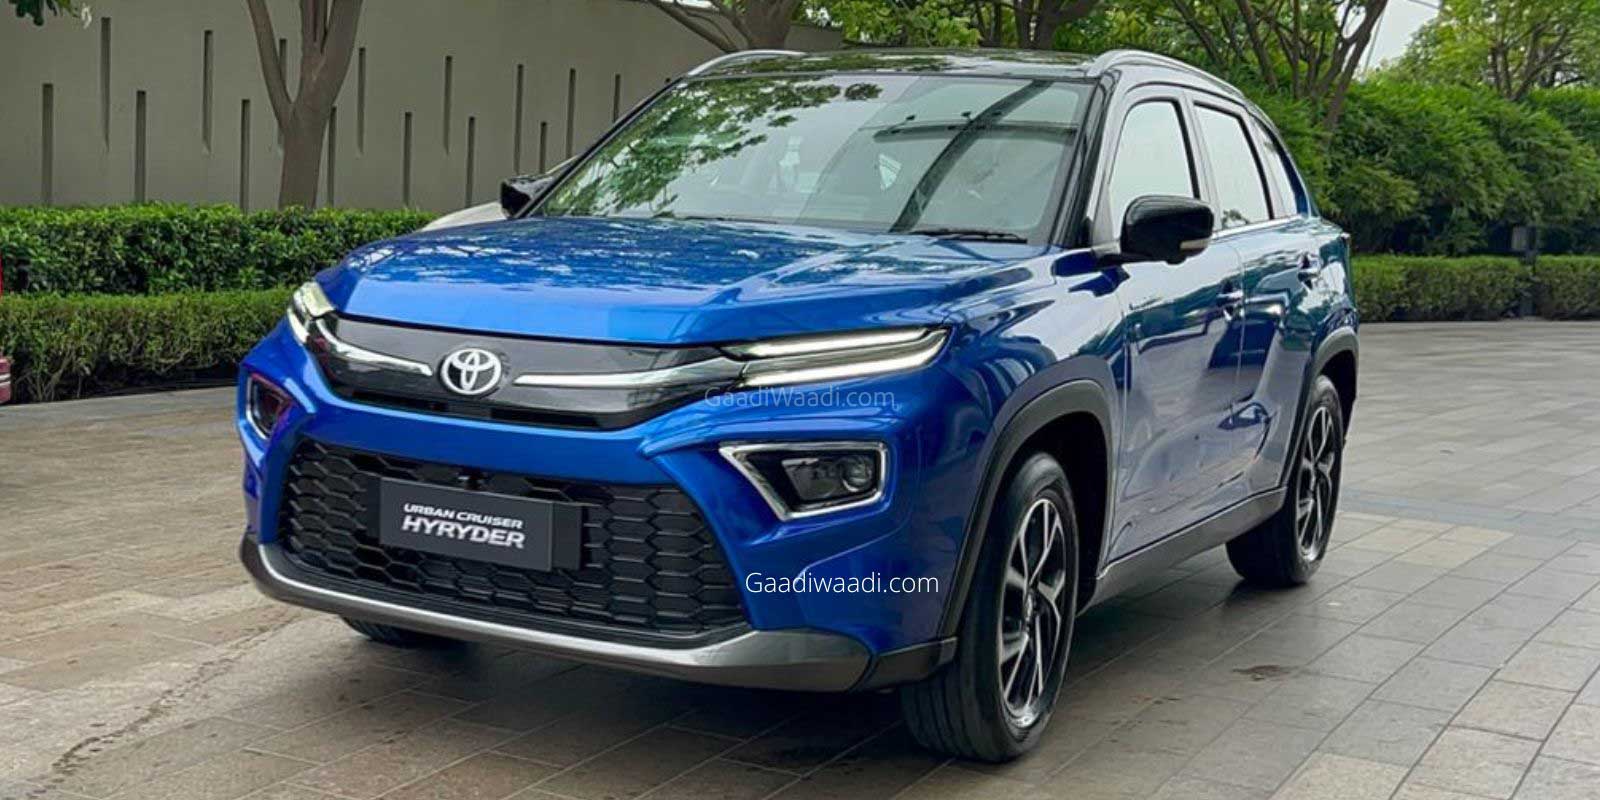 3 All-New Toyota Cars Launching Soon In India